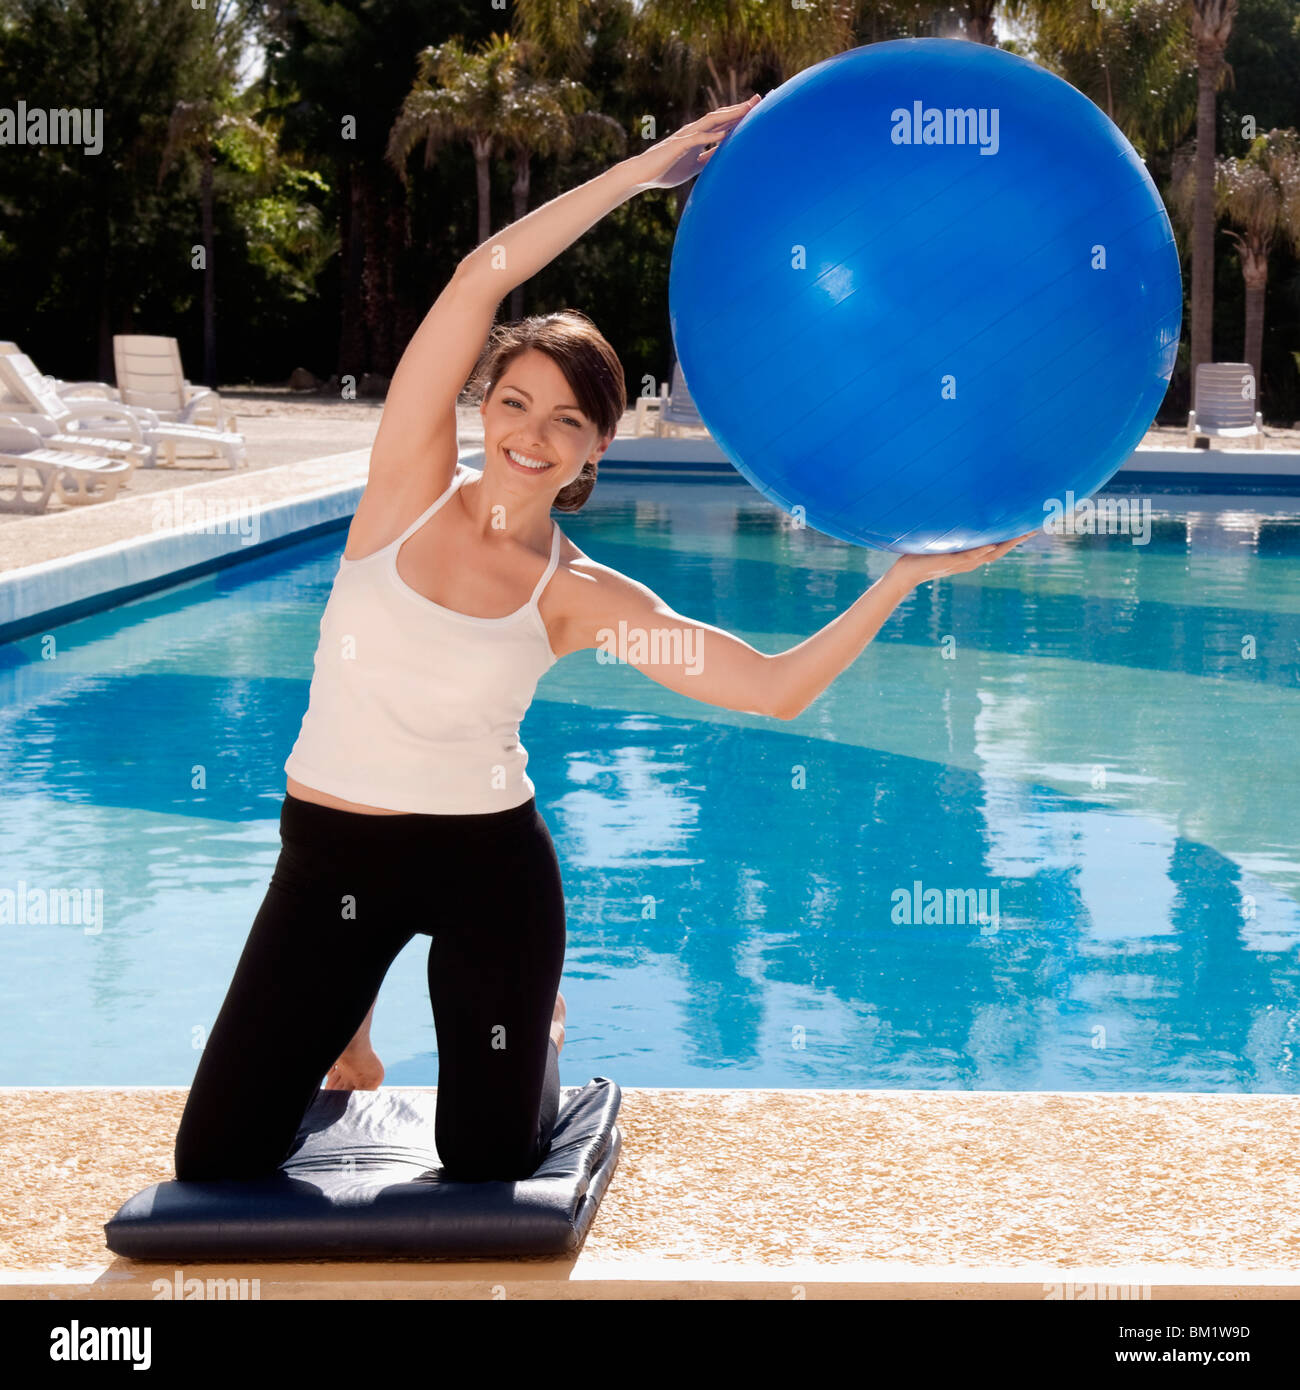 Woman exercising with a fitness ball at the poolside Stock Photo